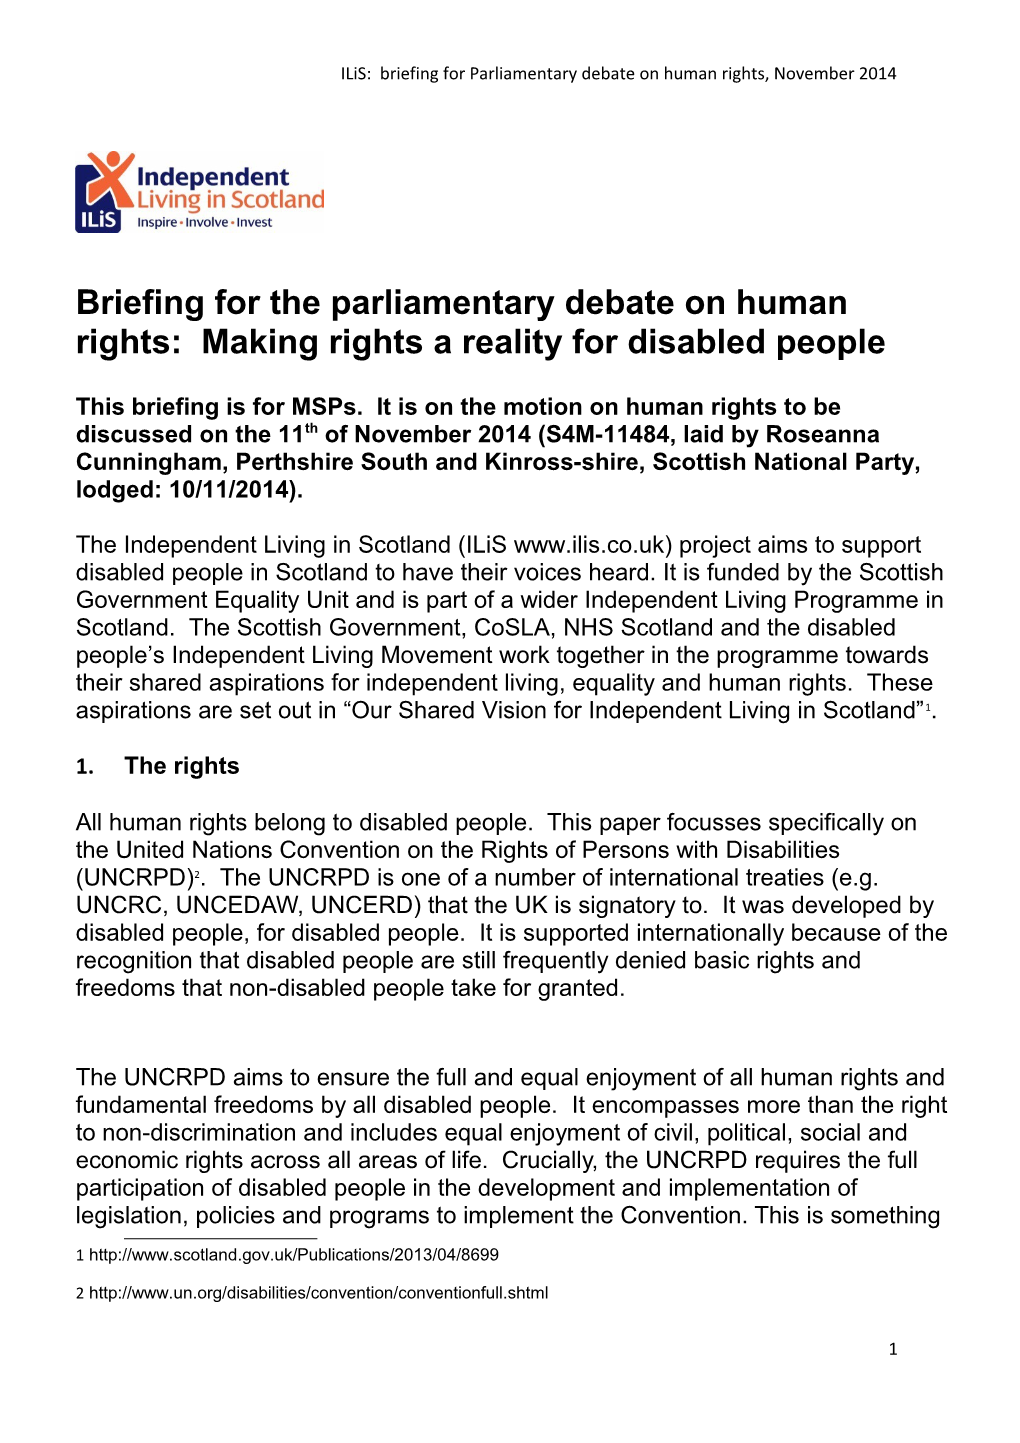 Briefing for the Parliamentary Debate on Human Rights: Making Rights a Reality for Disabled